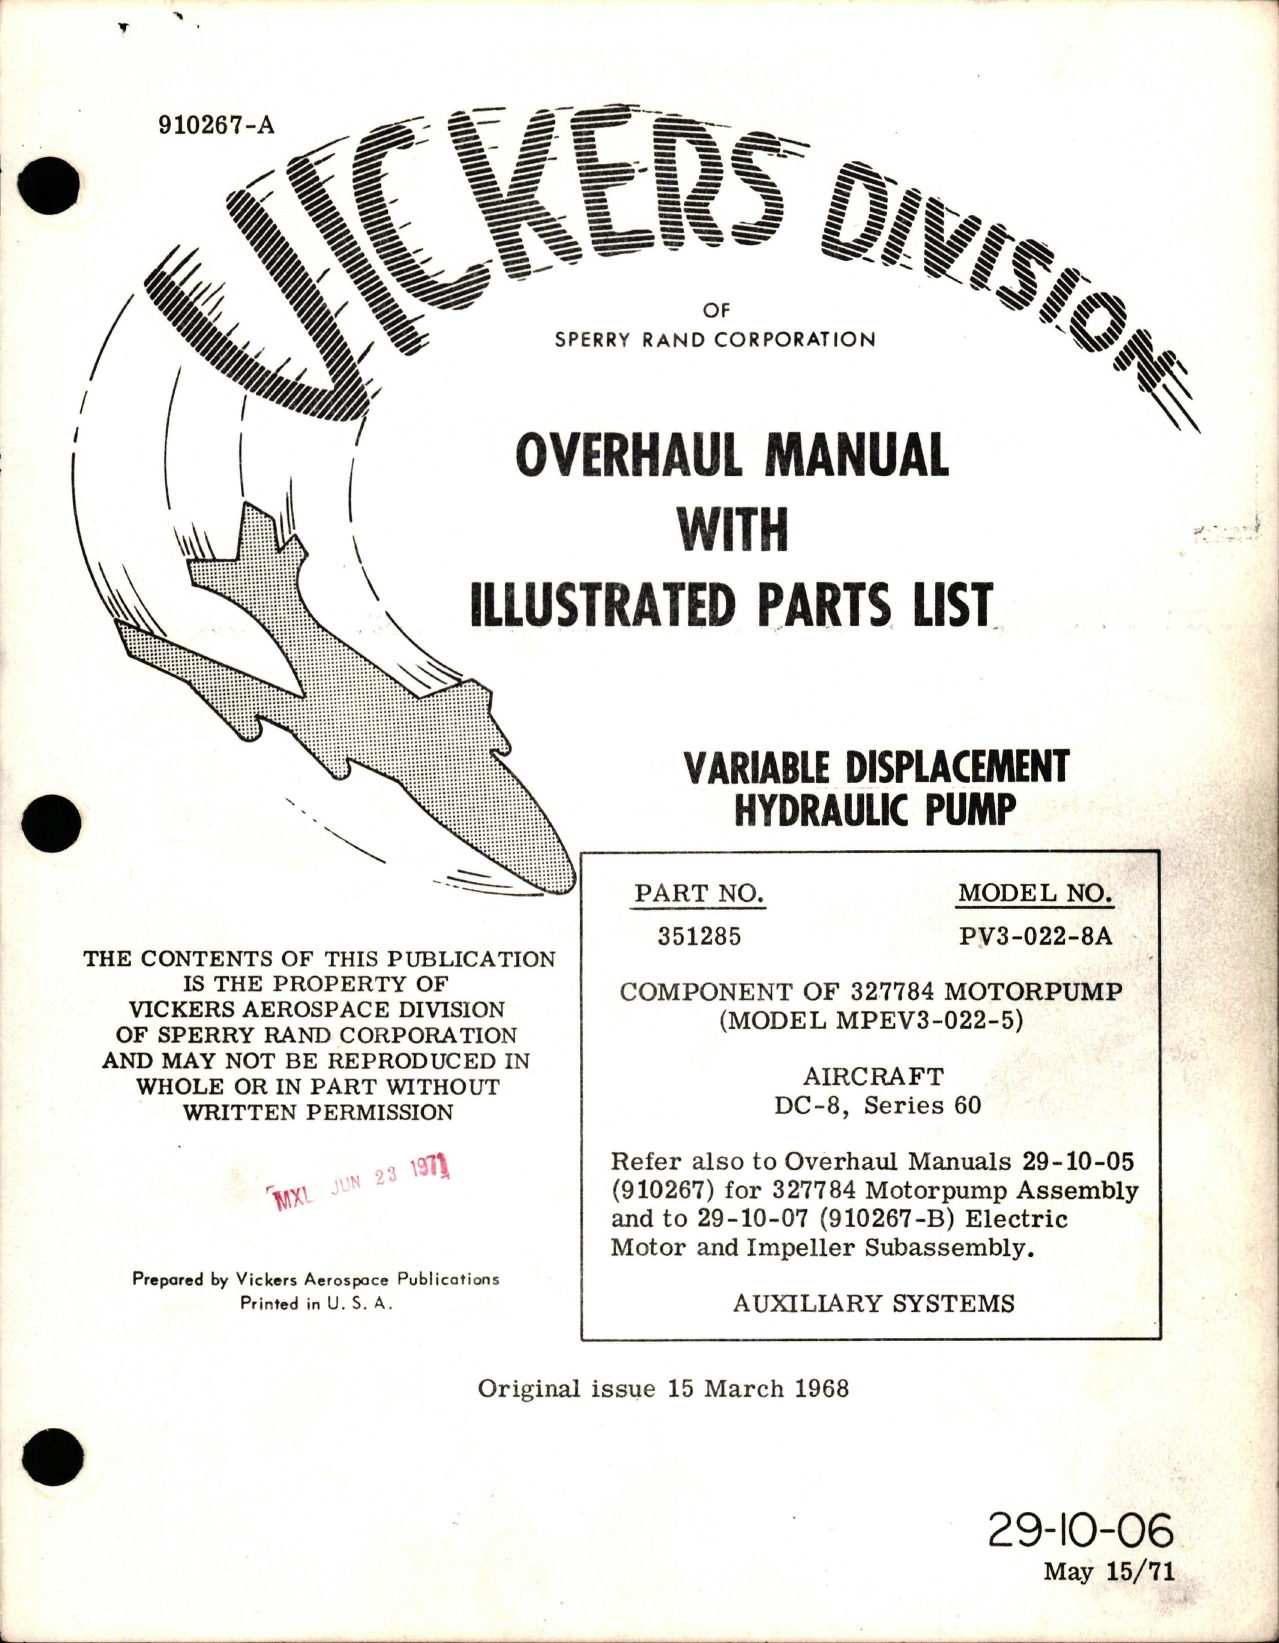 Sample page 1 from AirCorps Library document: Overhaul with Illustrated Parts List for Variable Displacement Hydraulic Pump - Part 351285 - Model PV3-022-8A